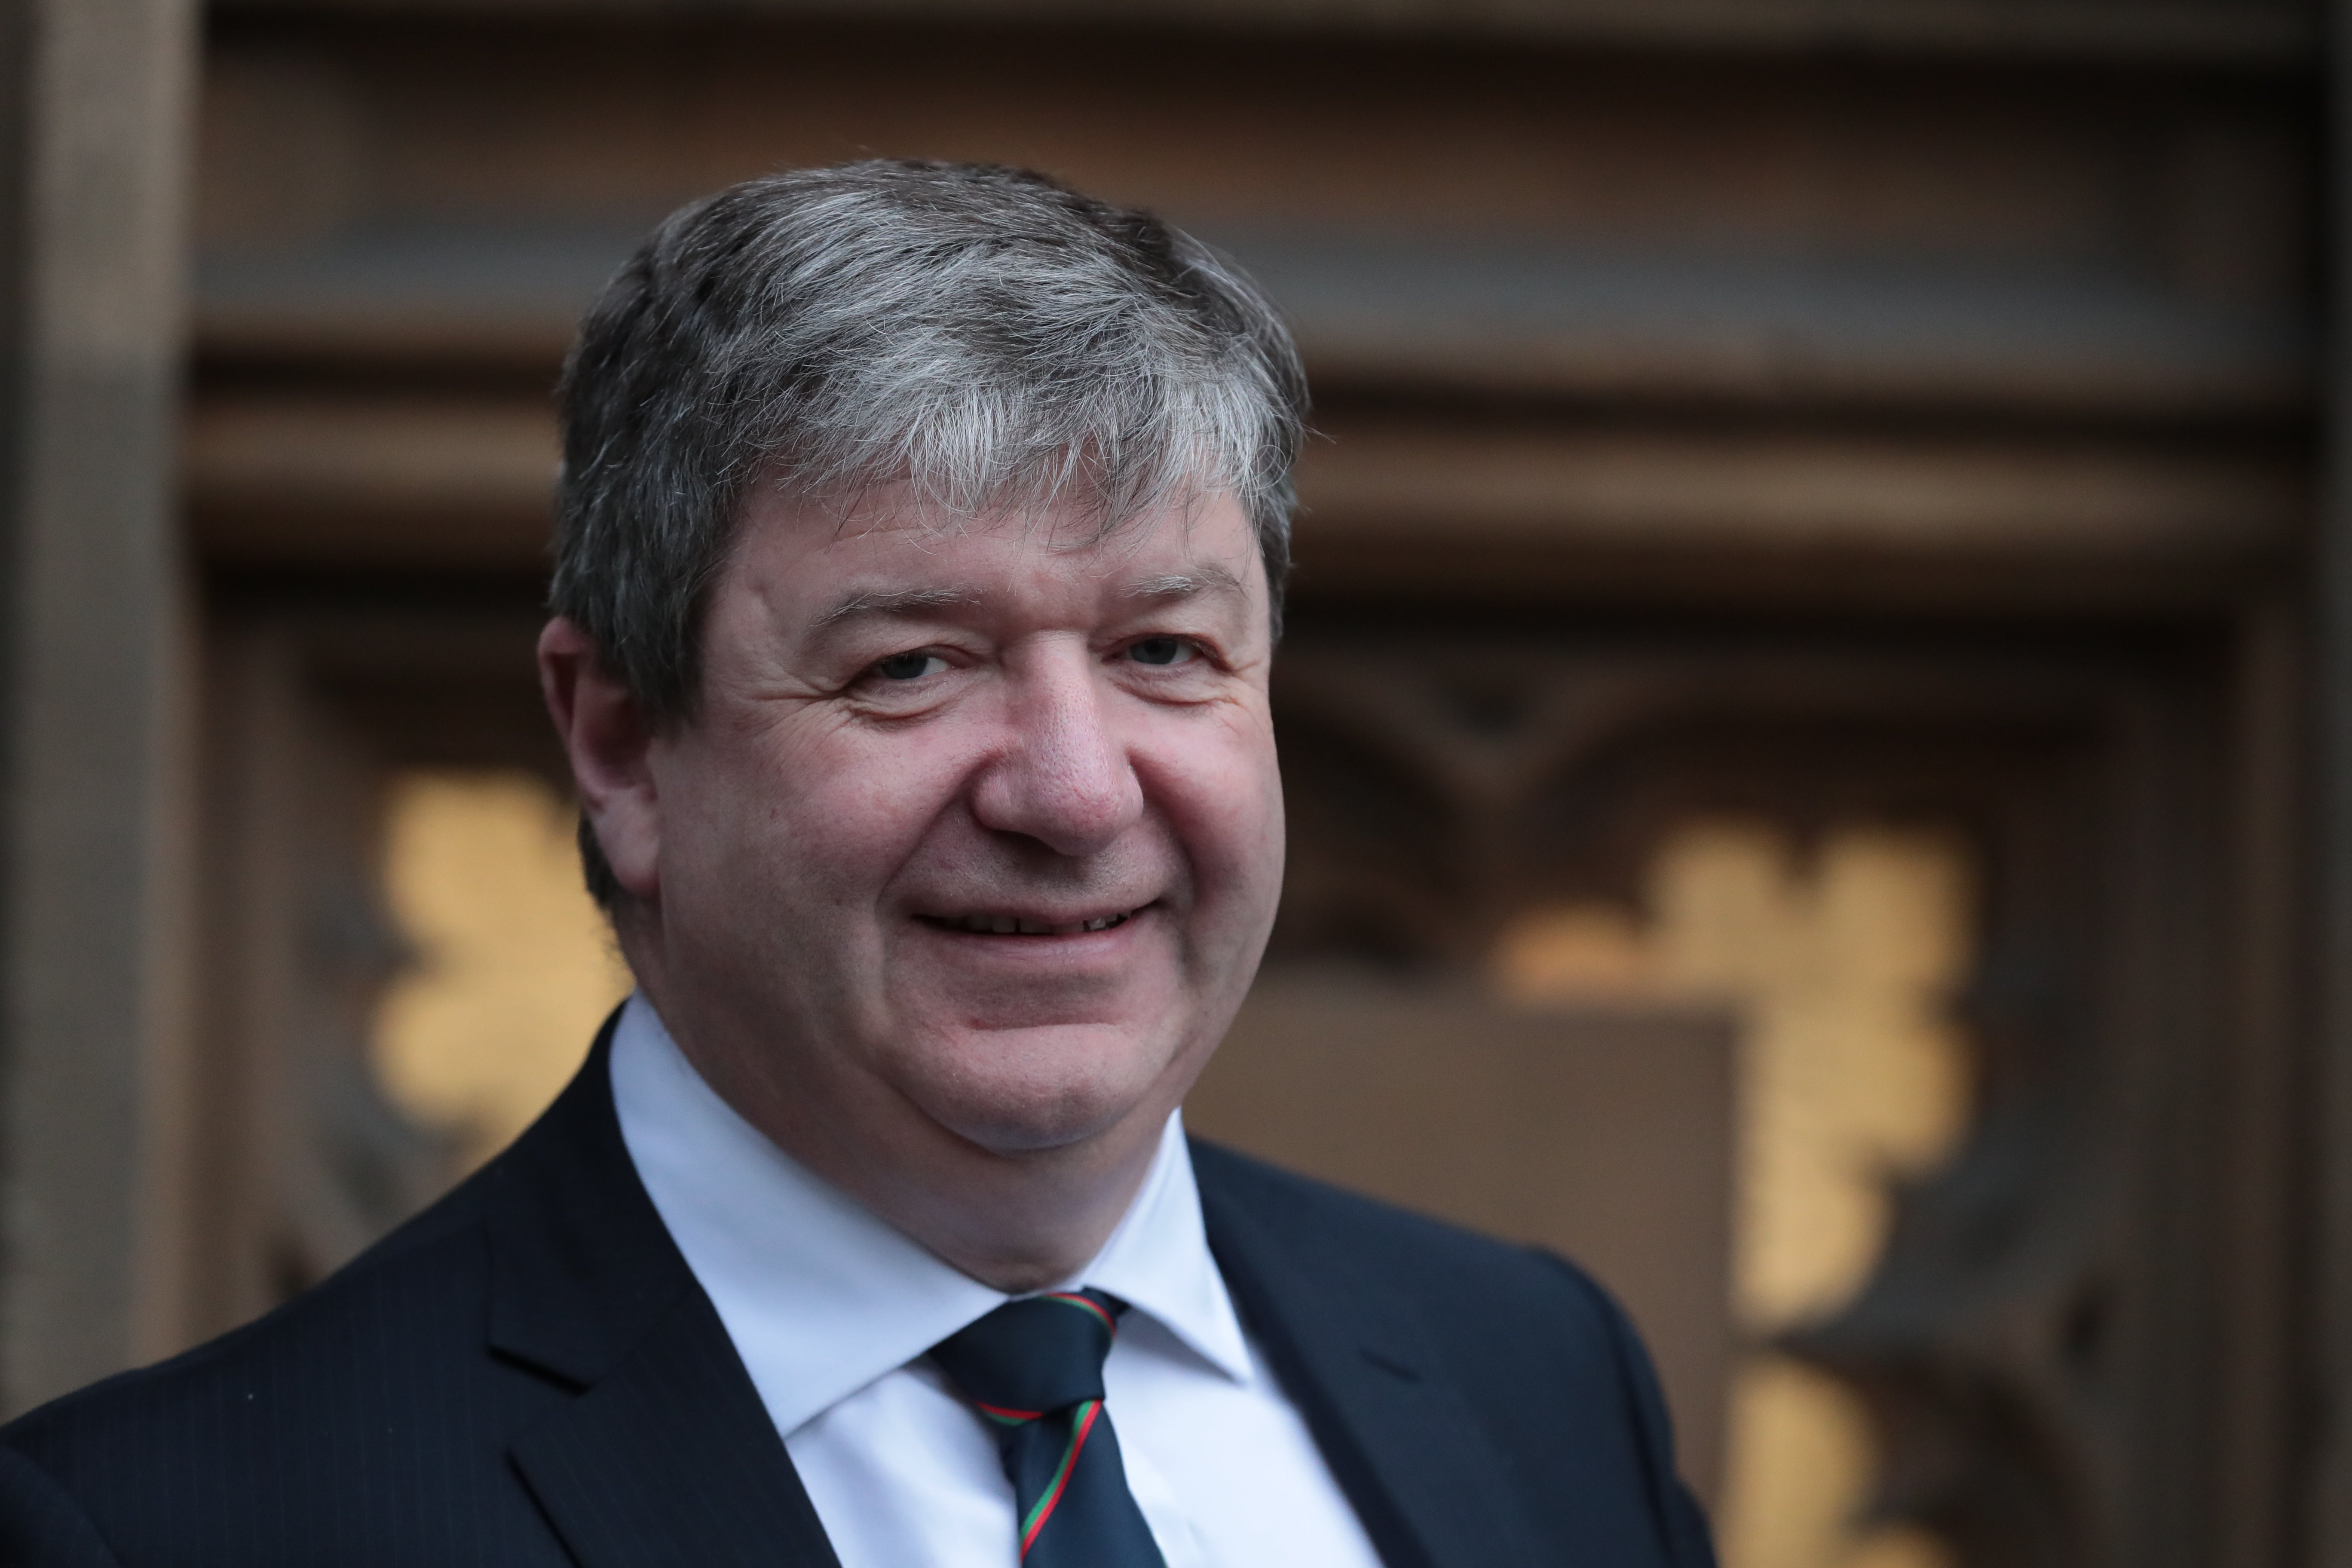 Liberal Democrat MP Alistair Carmichael stressed the need to ‘shift the debate’ on the issue of oil and gas. (Aaron Chown/PA)